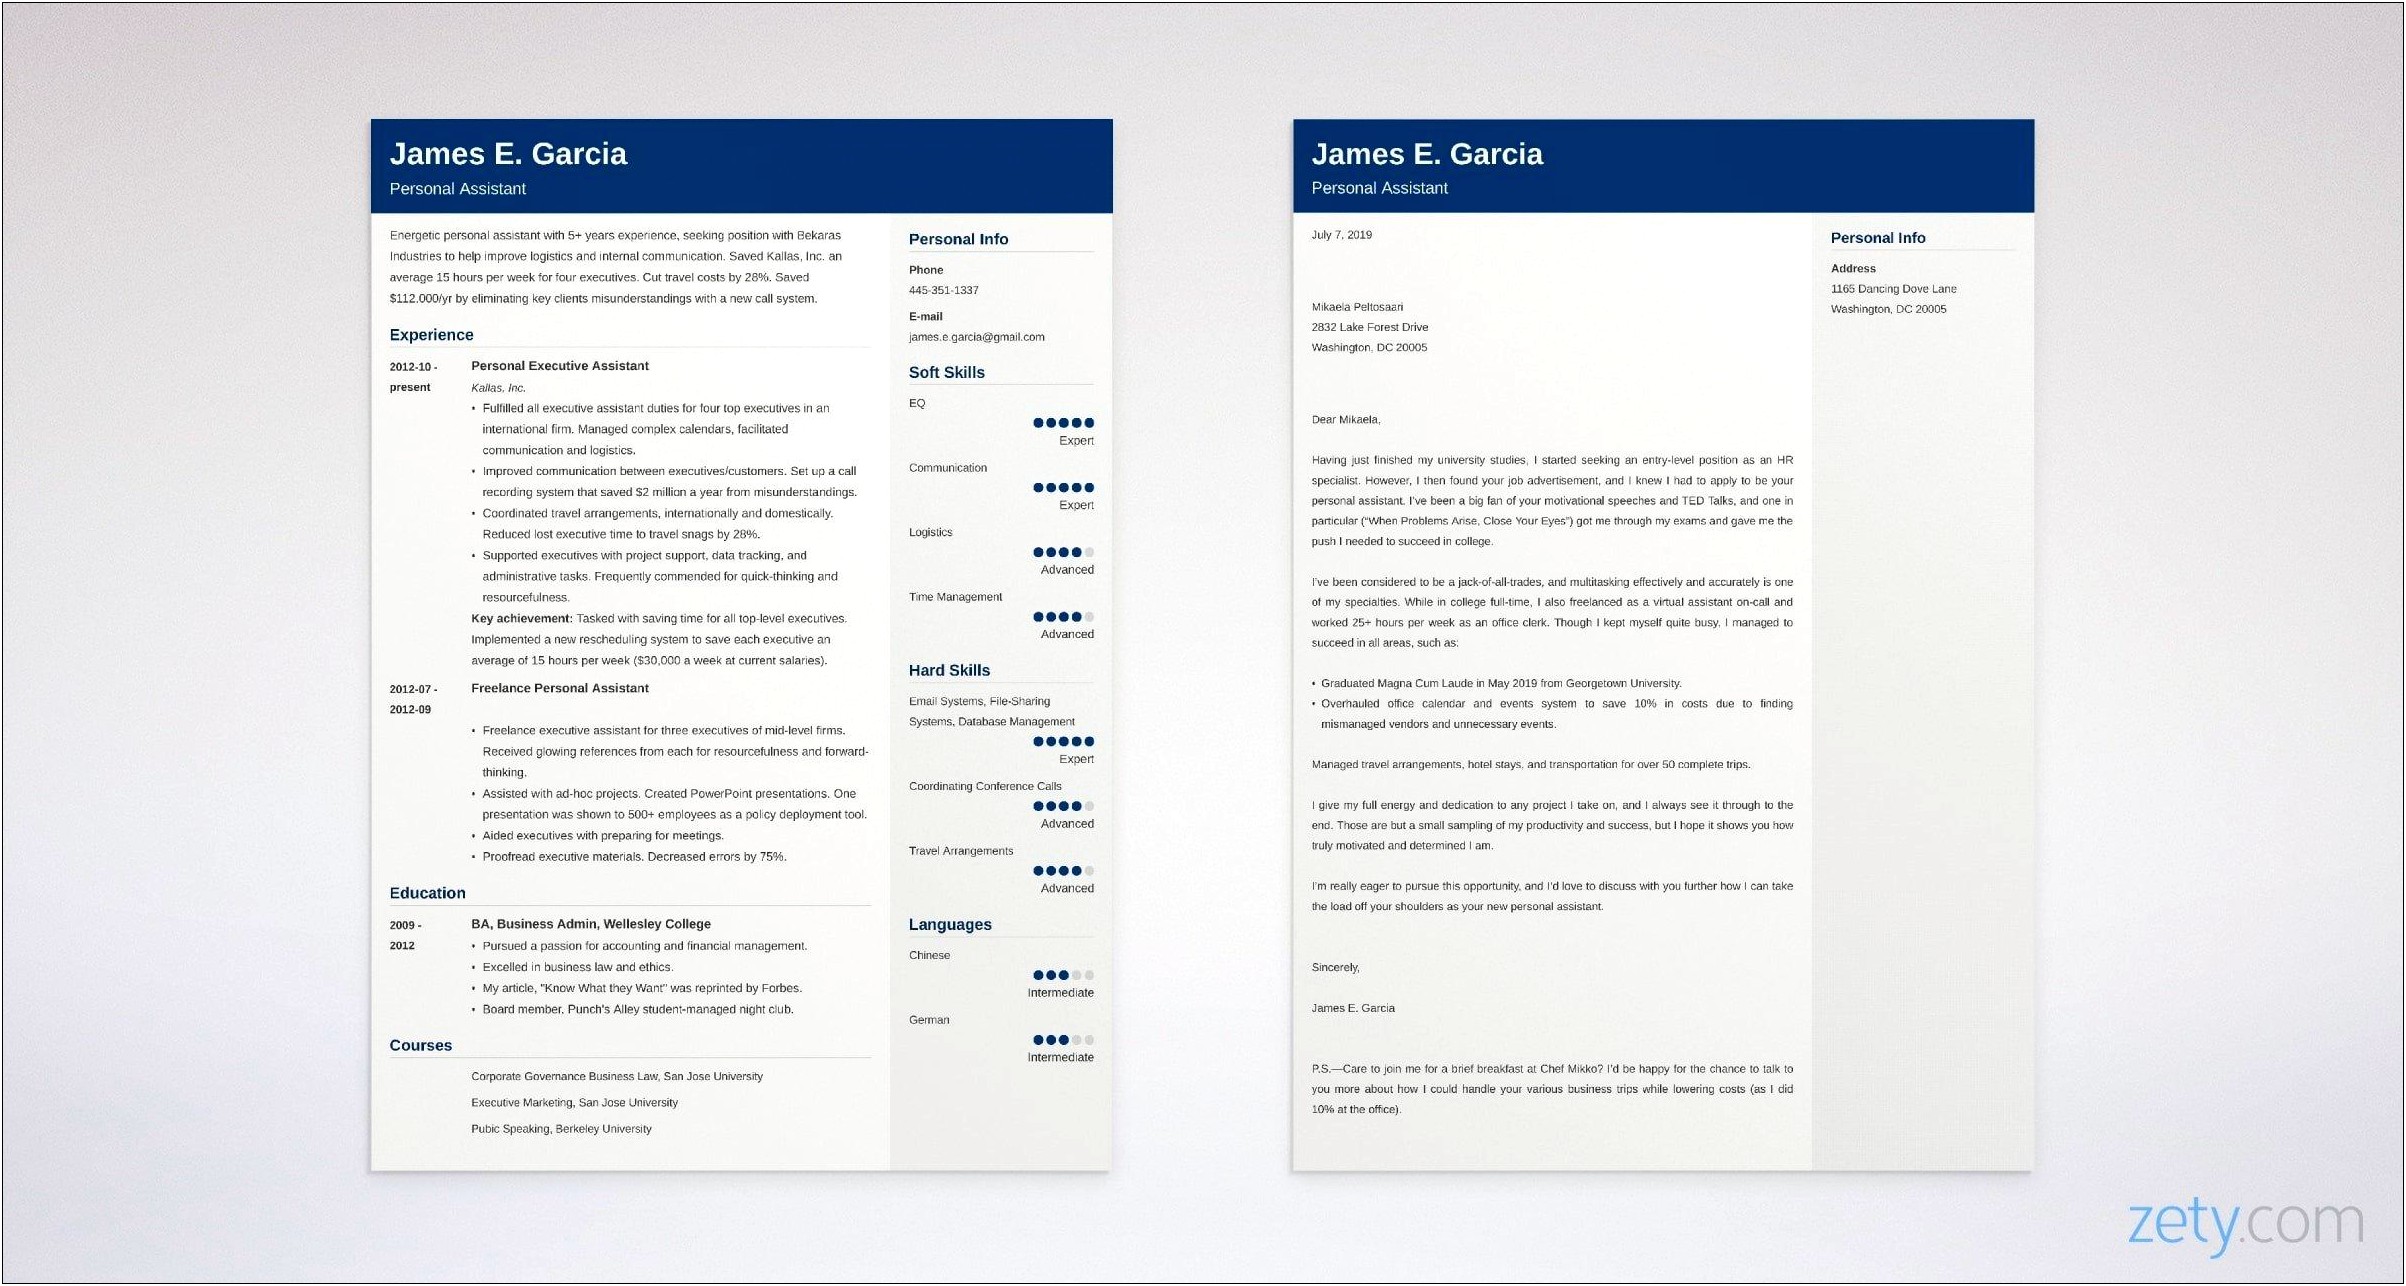 Resume And Cover Letter As One Document